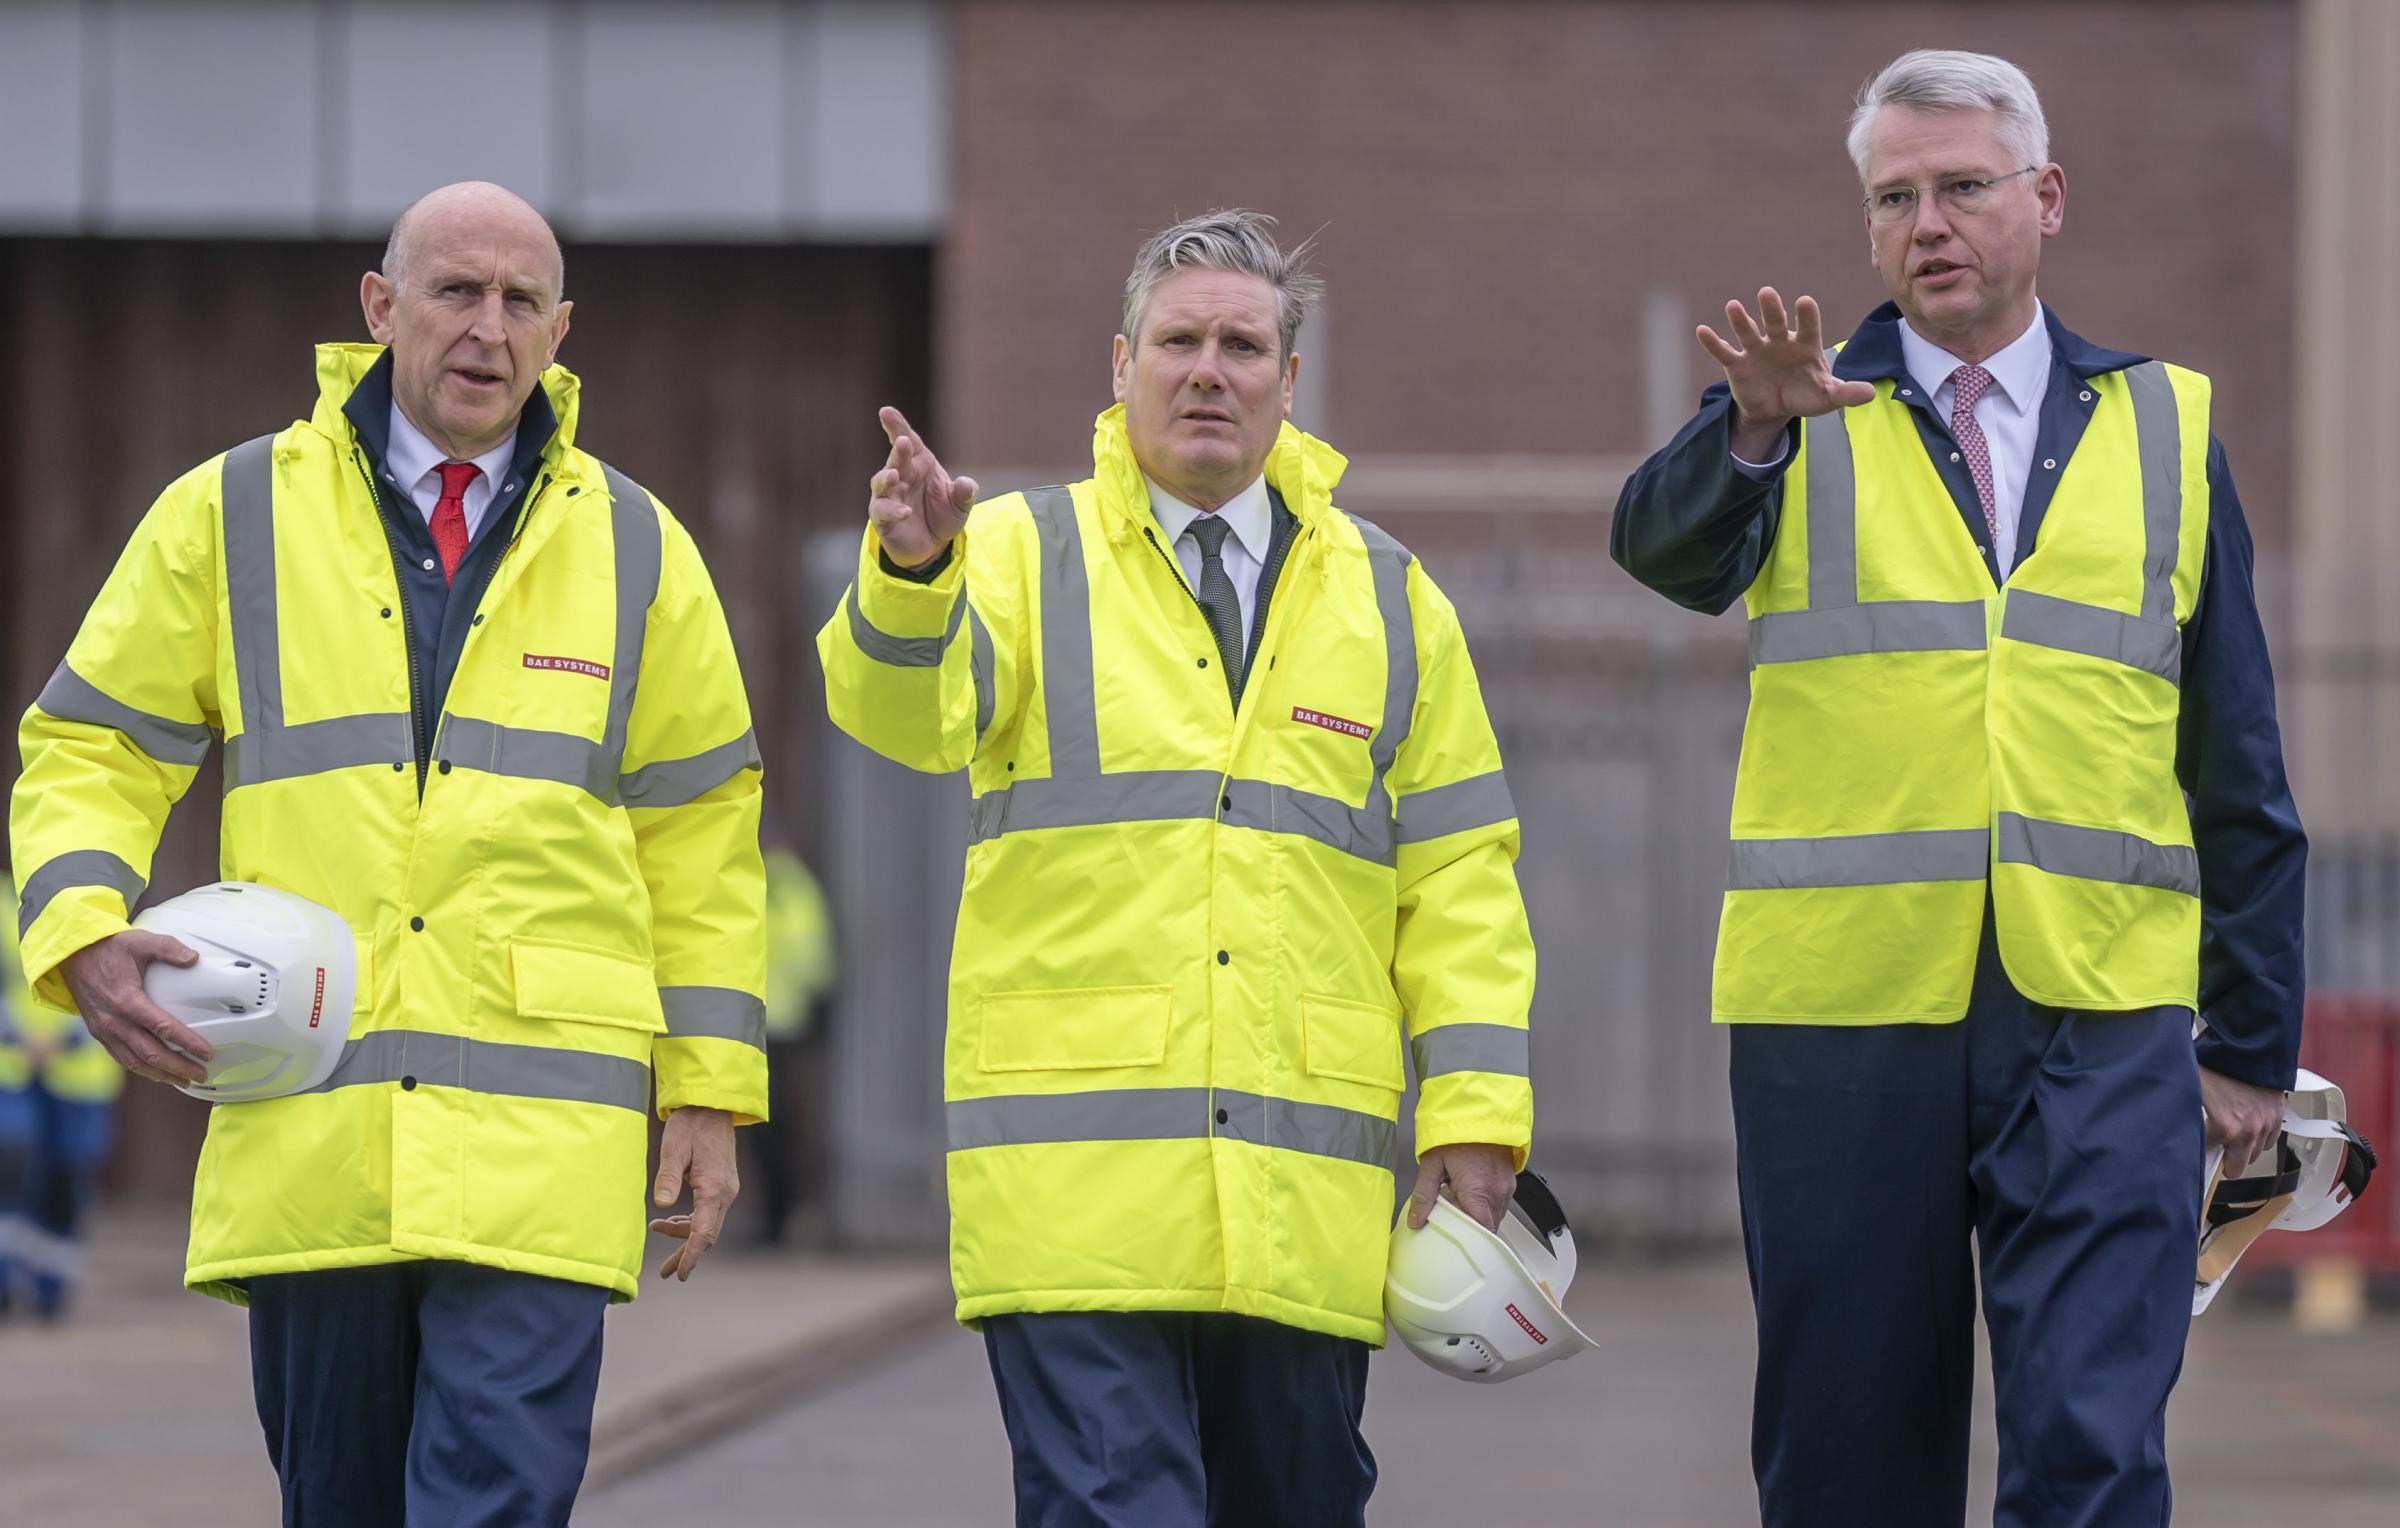 Labour Party leader Sir Keir Starmer with shadow defence secretary John Healey (left) and CEO of BAE Systems (right), during a campaign visit to BAE Systems in Barrow-in-Furness, Cumbria. The Labour leader has said the UKs nuclear deterrent is the